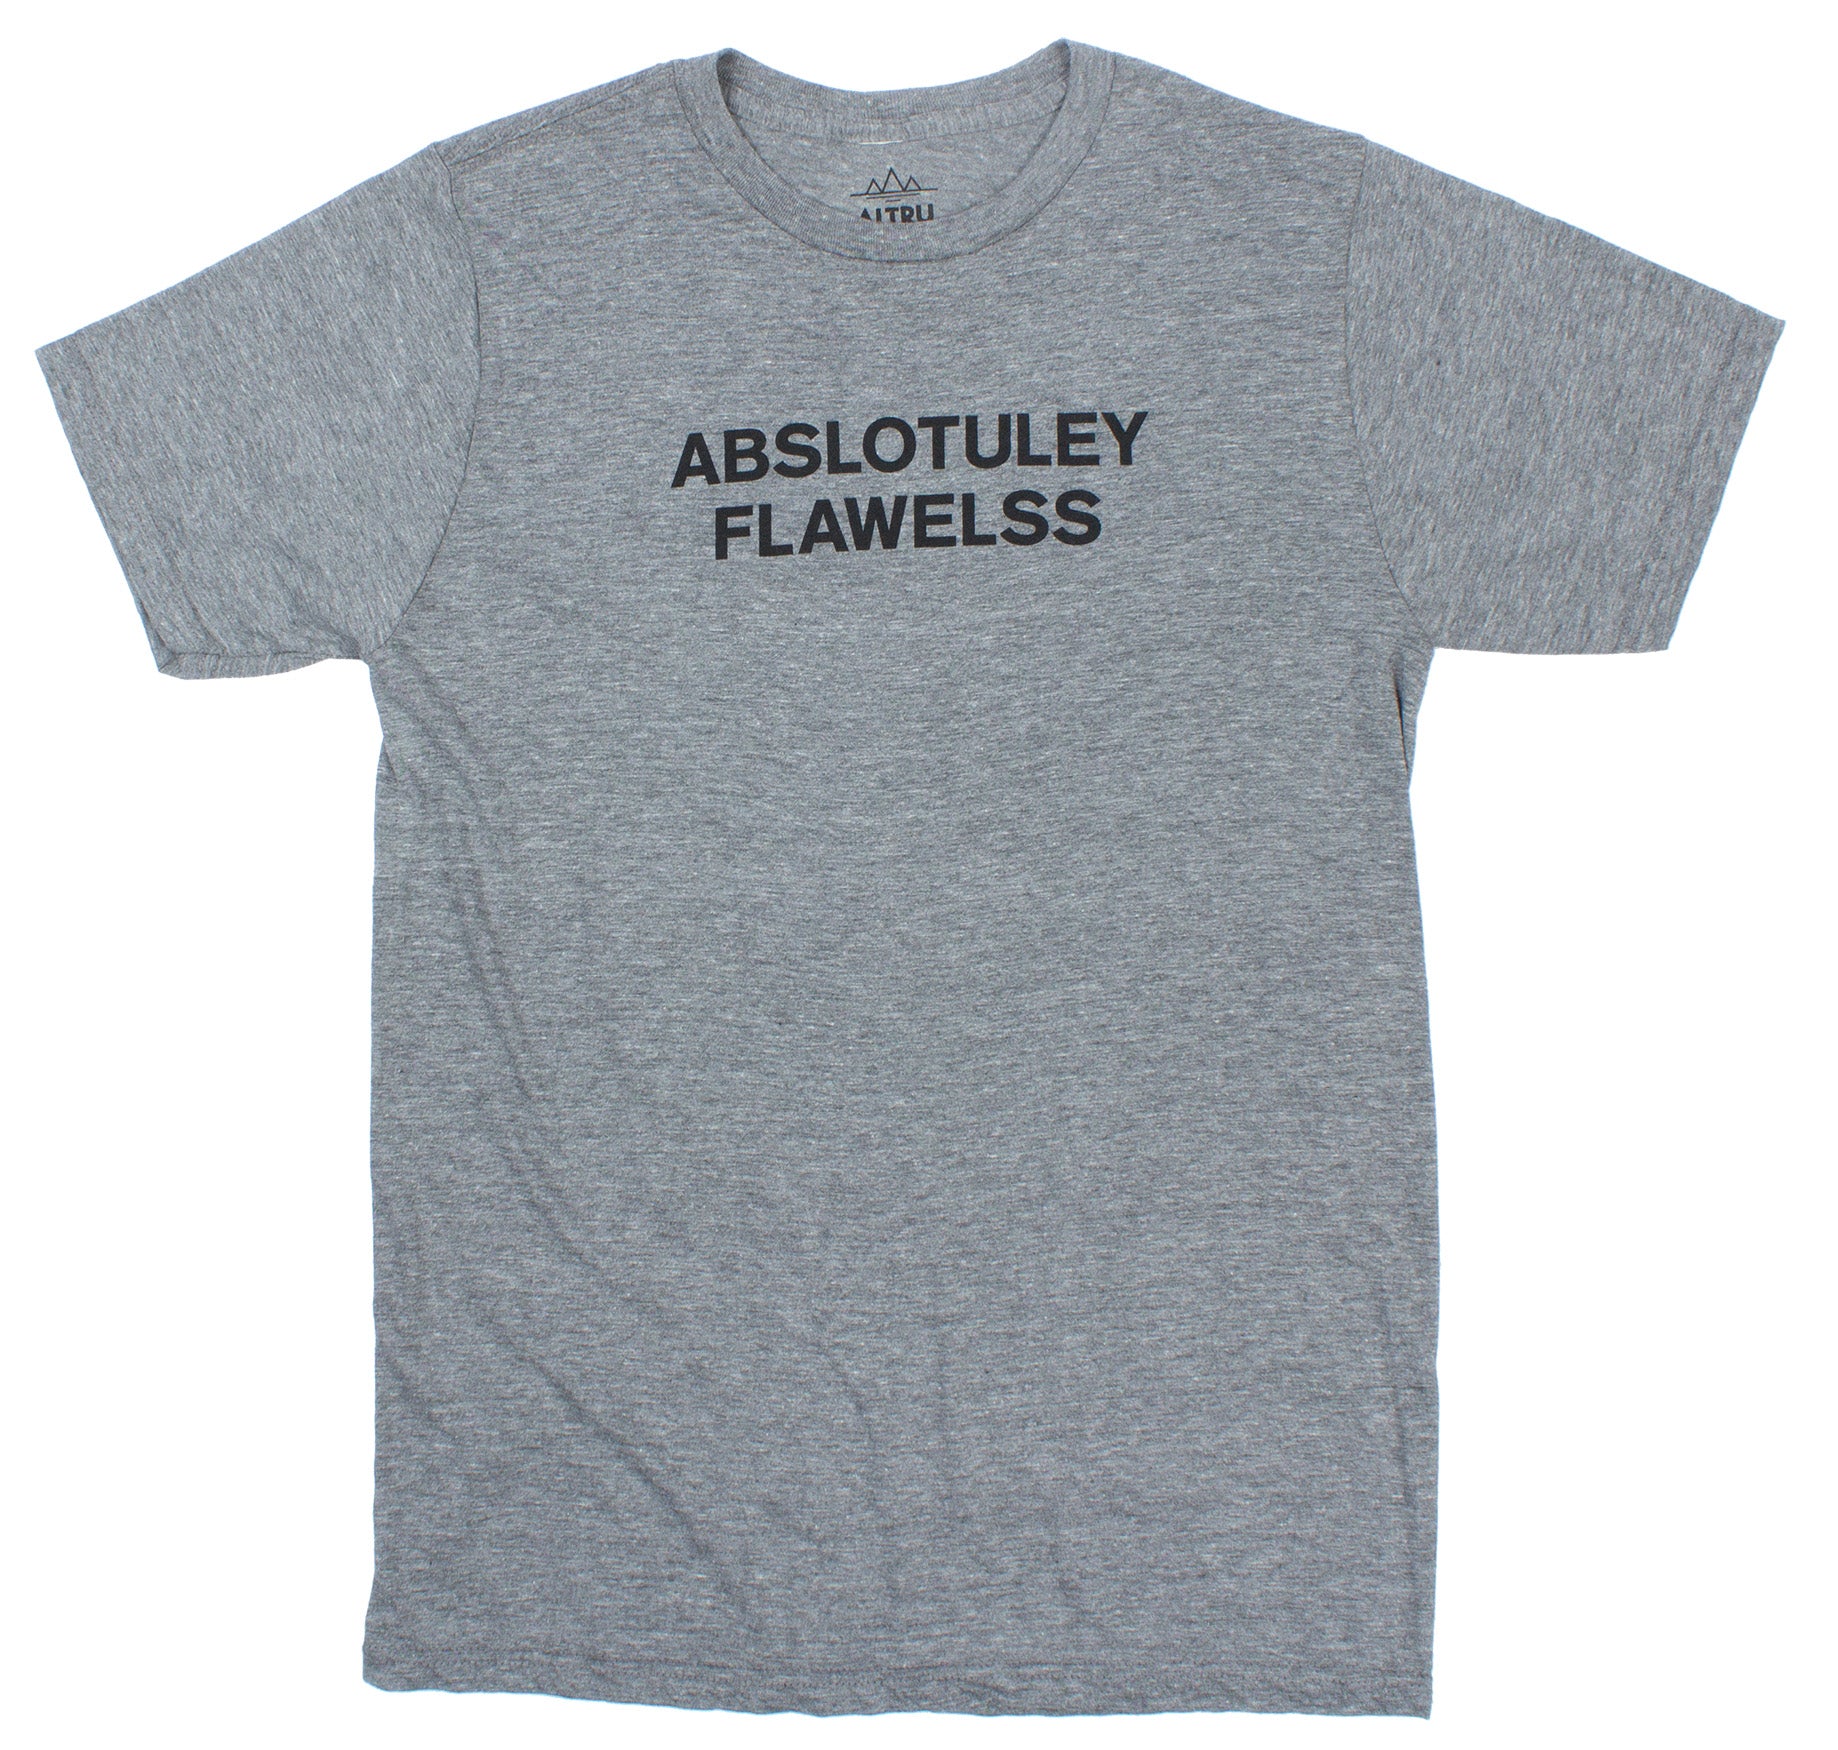 Abslotuley Flawelss Mens Graphic Tee (It's spelled wrong...get it?)